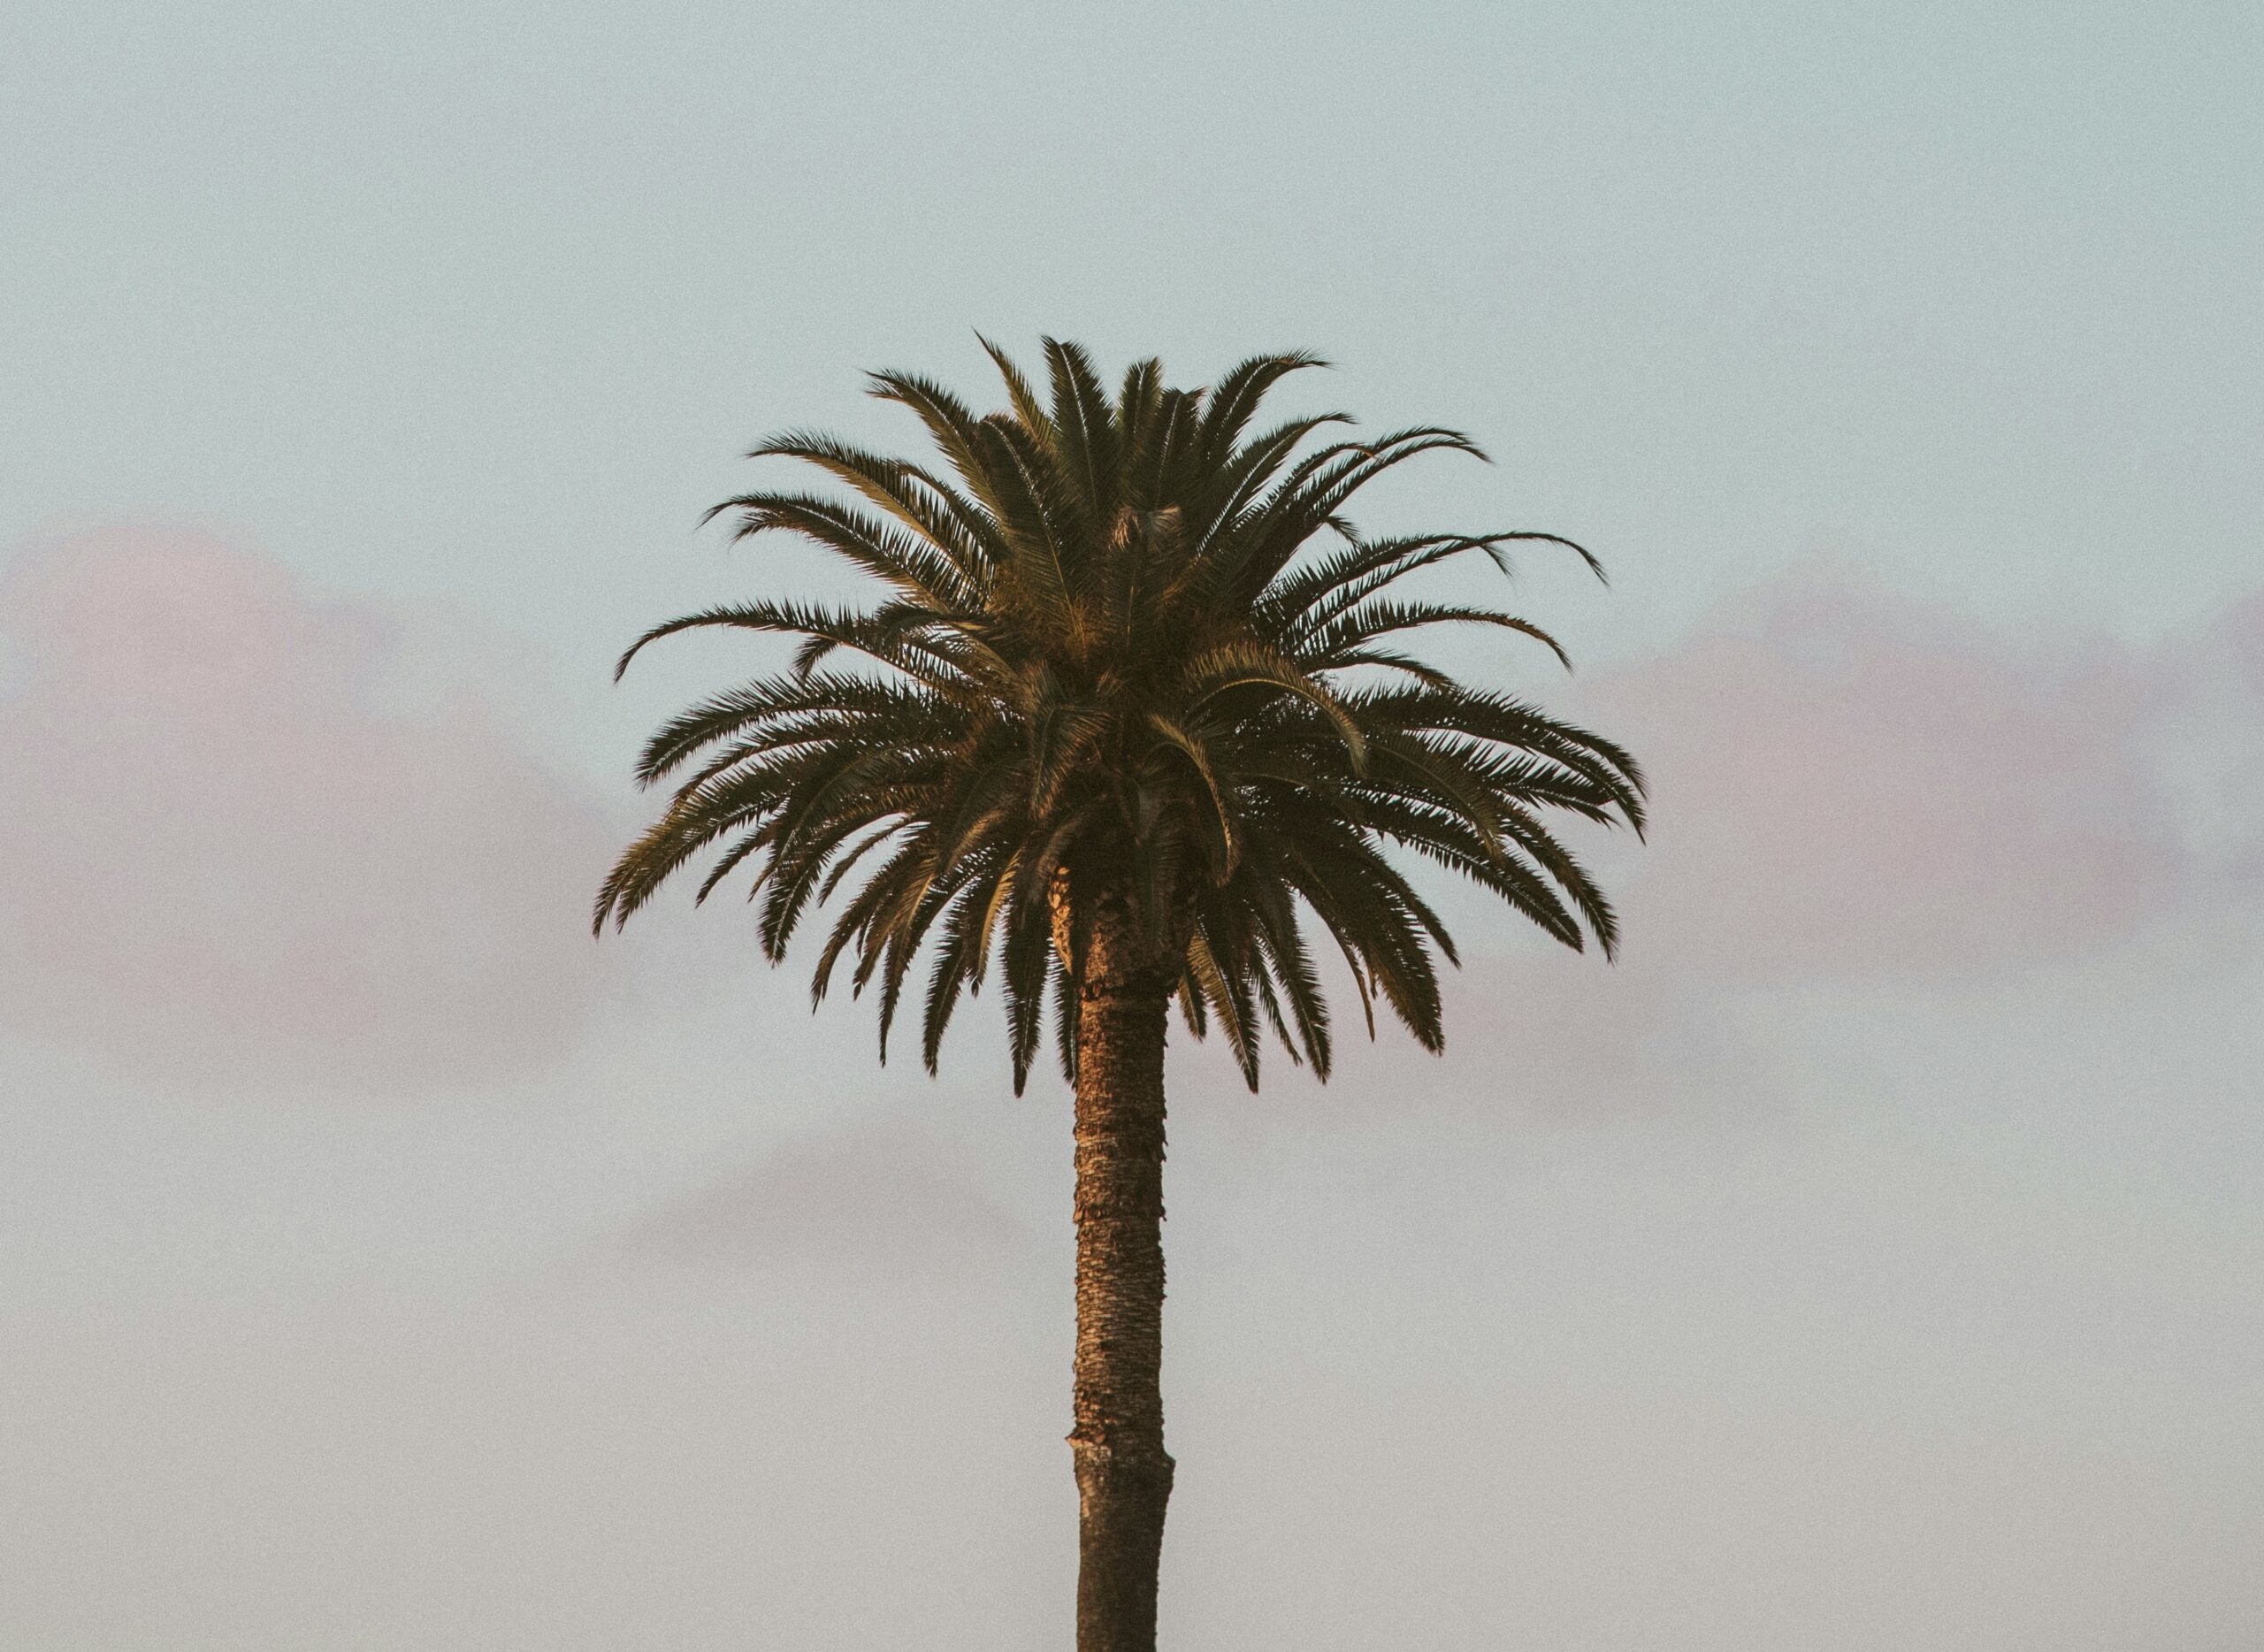 This controversy over an Airbnb is a legal battle that may discourage some travelers. 
Pictured: a California palm tree 